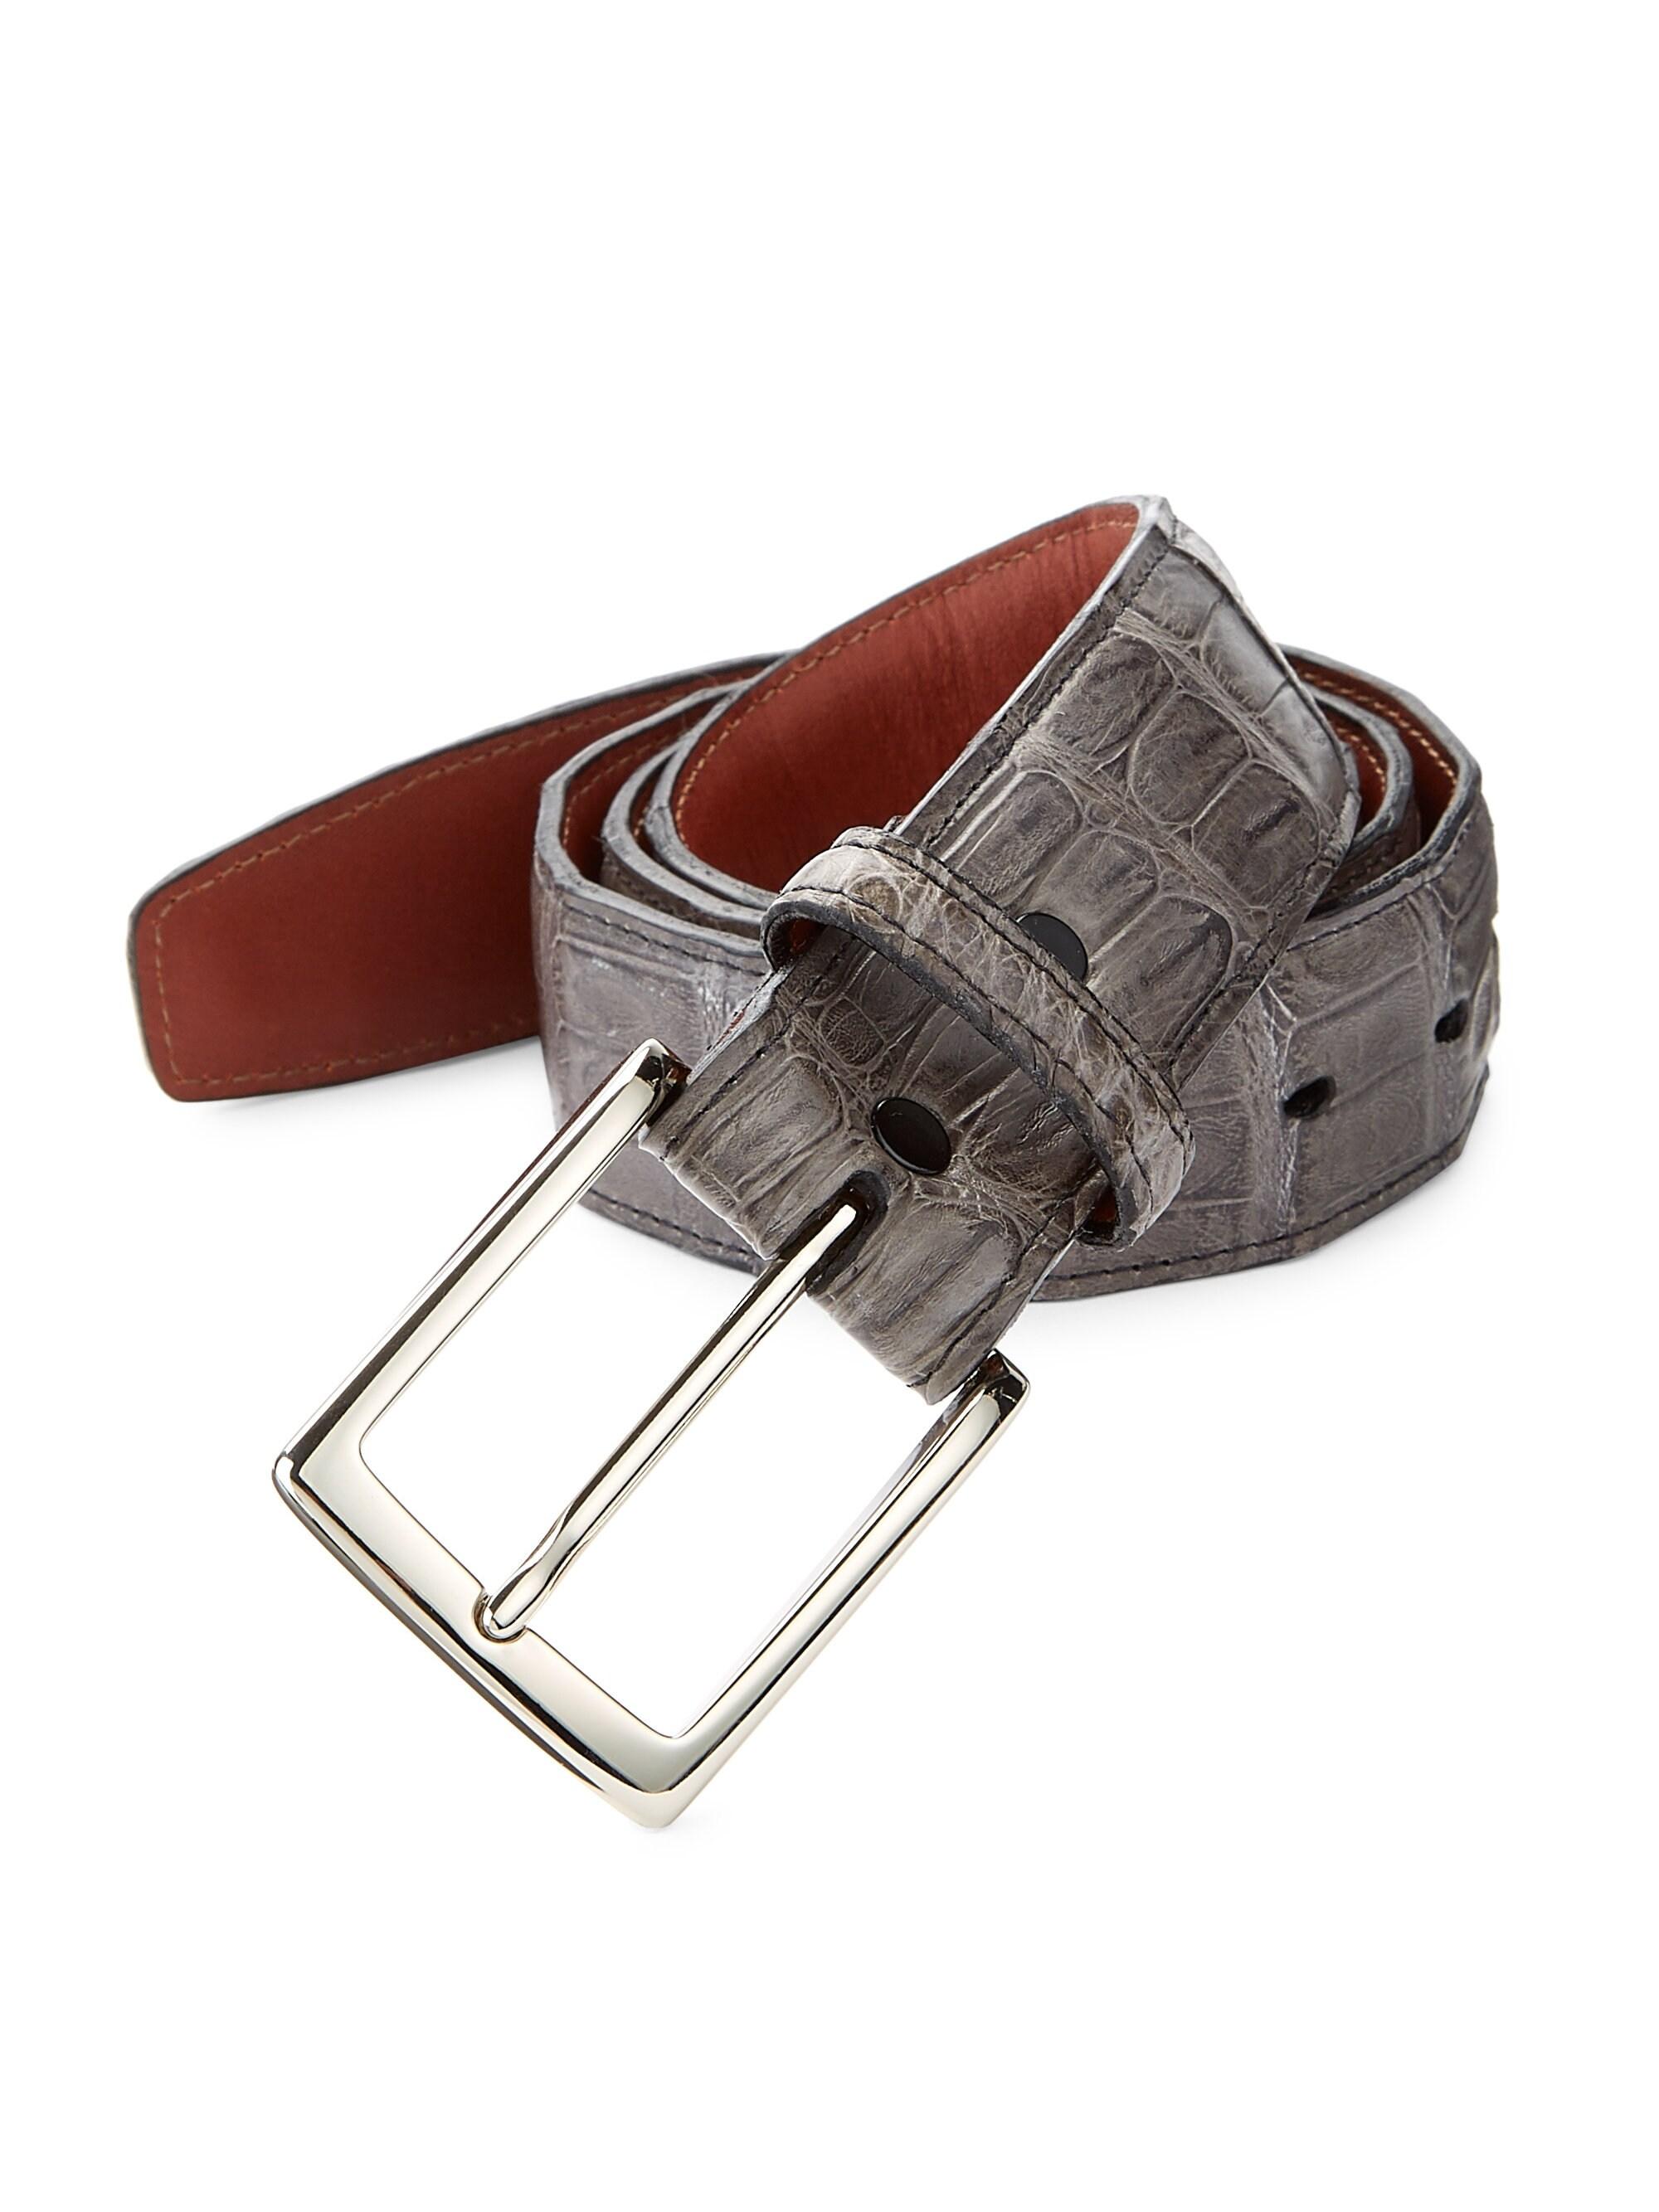 Saks Fifth Avenue Collection Crocodile Belt in Gray for Men - Lyst